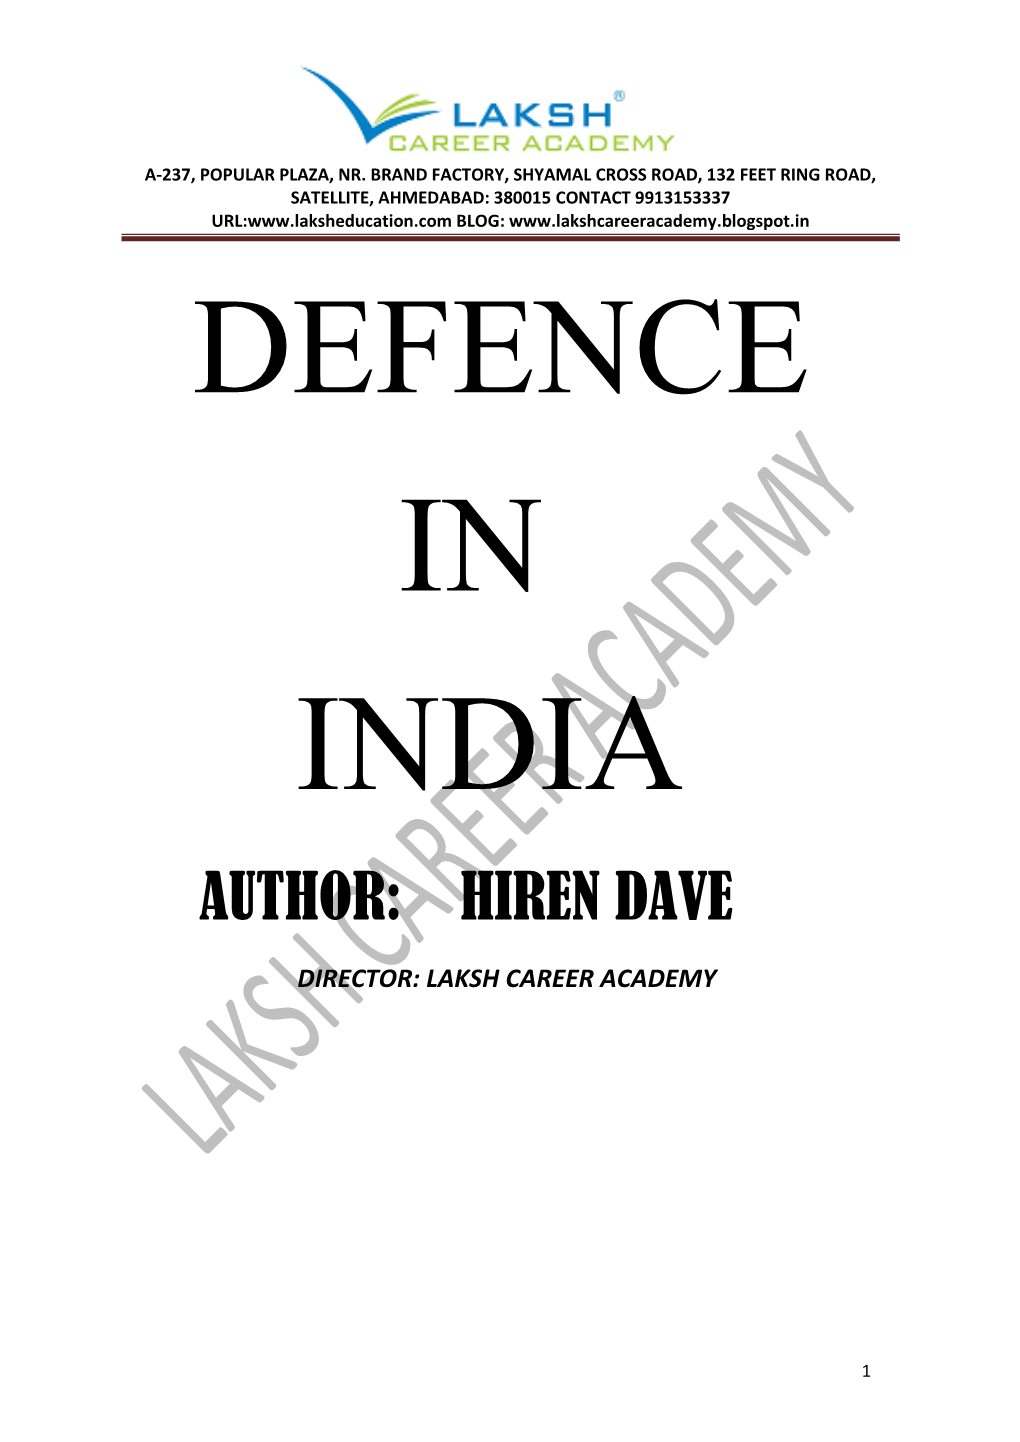 DEFENCE in INDIA LAKSH Career Academy UTHOR